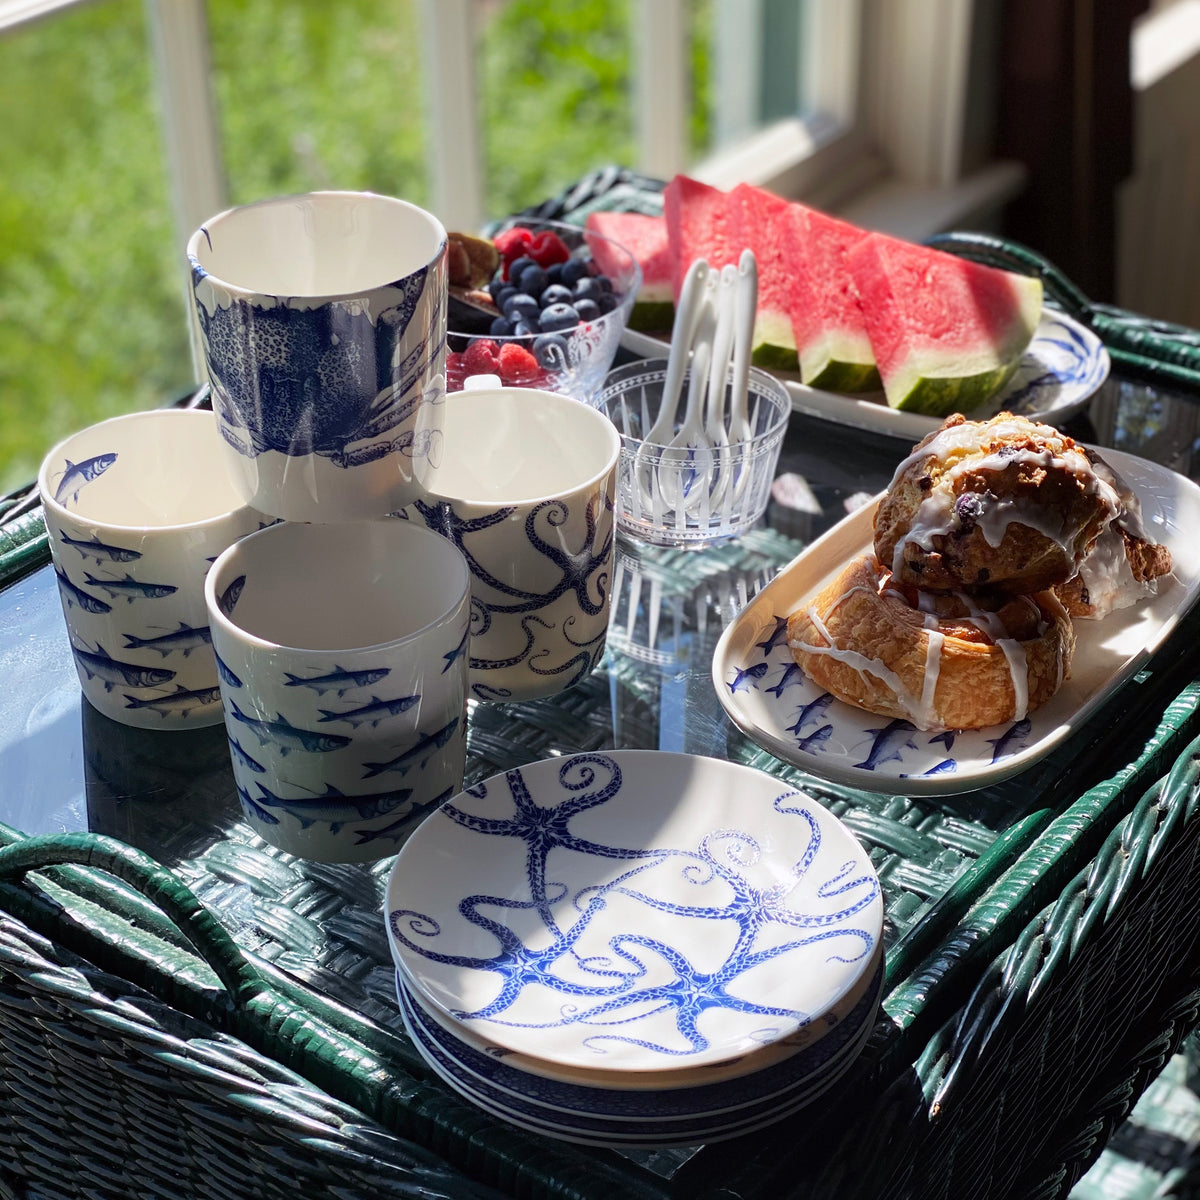 A table set with heirloom-quality dishware featuring marine life designs, croissants and pastries on a plate, fresh berries in bowls, **Caskata Artisanal Home Starfish Small Plates** alongside watermelon slices on a tray, and plastic forks in a glass.